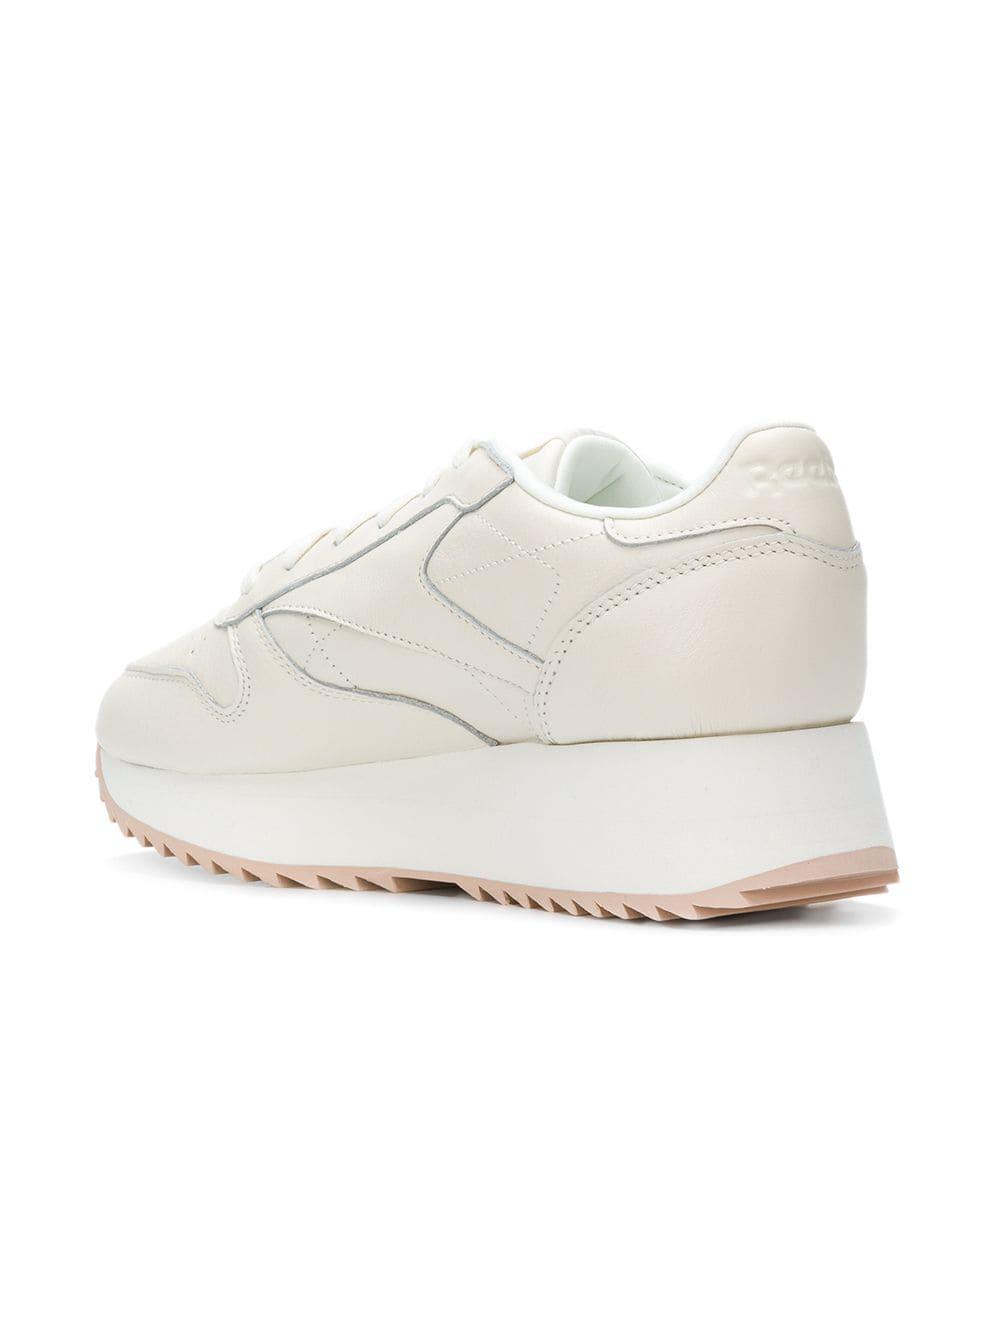 Reebok Leather Classic Platform Sneakers in White | Lyst